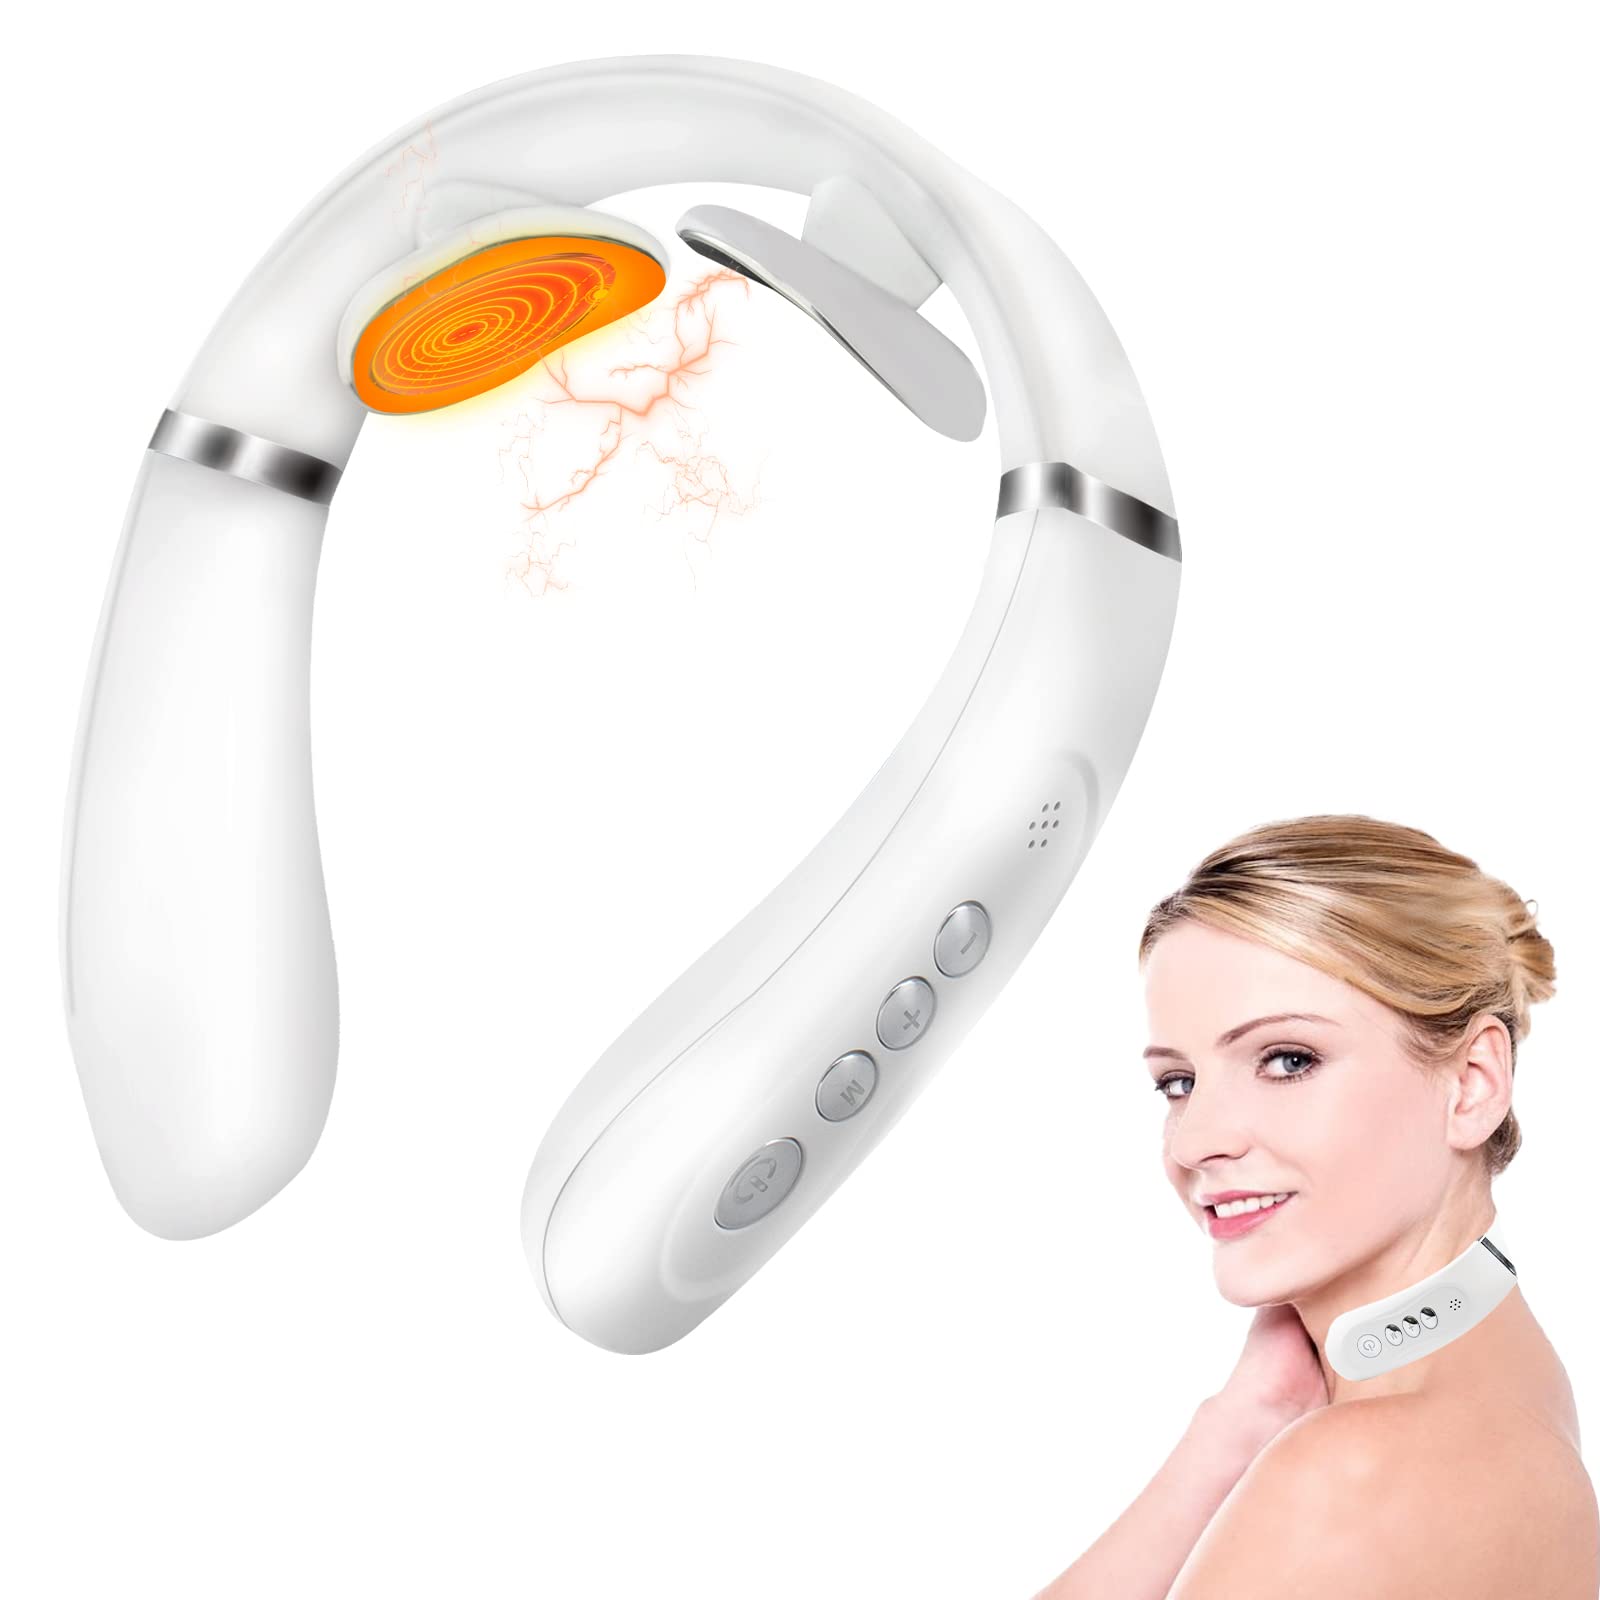 New Intelligent Electric Neck Massager With Heat Function & Pulse Massage  For Home Use, Shoulder Neck Pain Relief